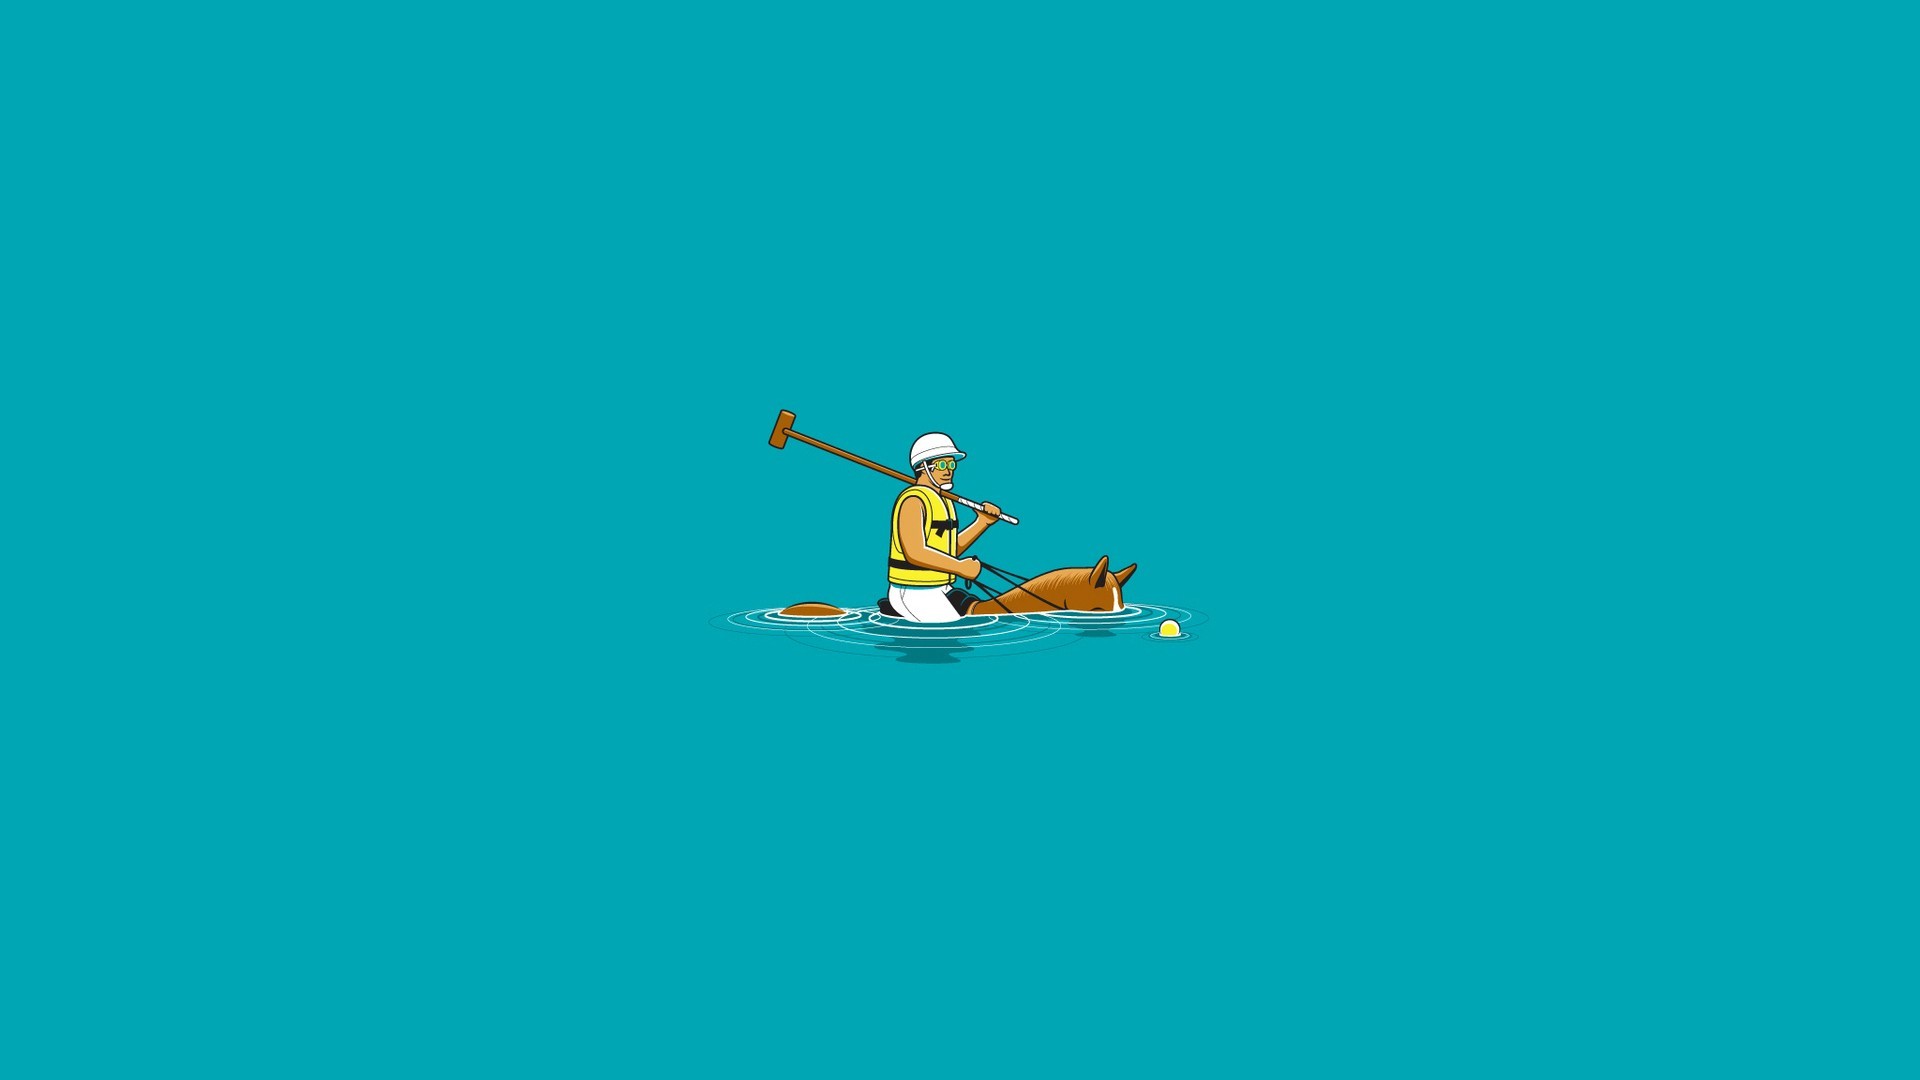 1920x1080 minimalism, Humor, Horse, Sports, Polo, Water, Ball, Drown, Blue Background  Wallpapers HD / Desktop and Mobile Backgrounds